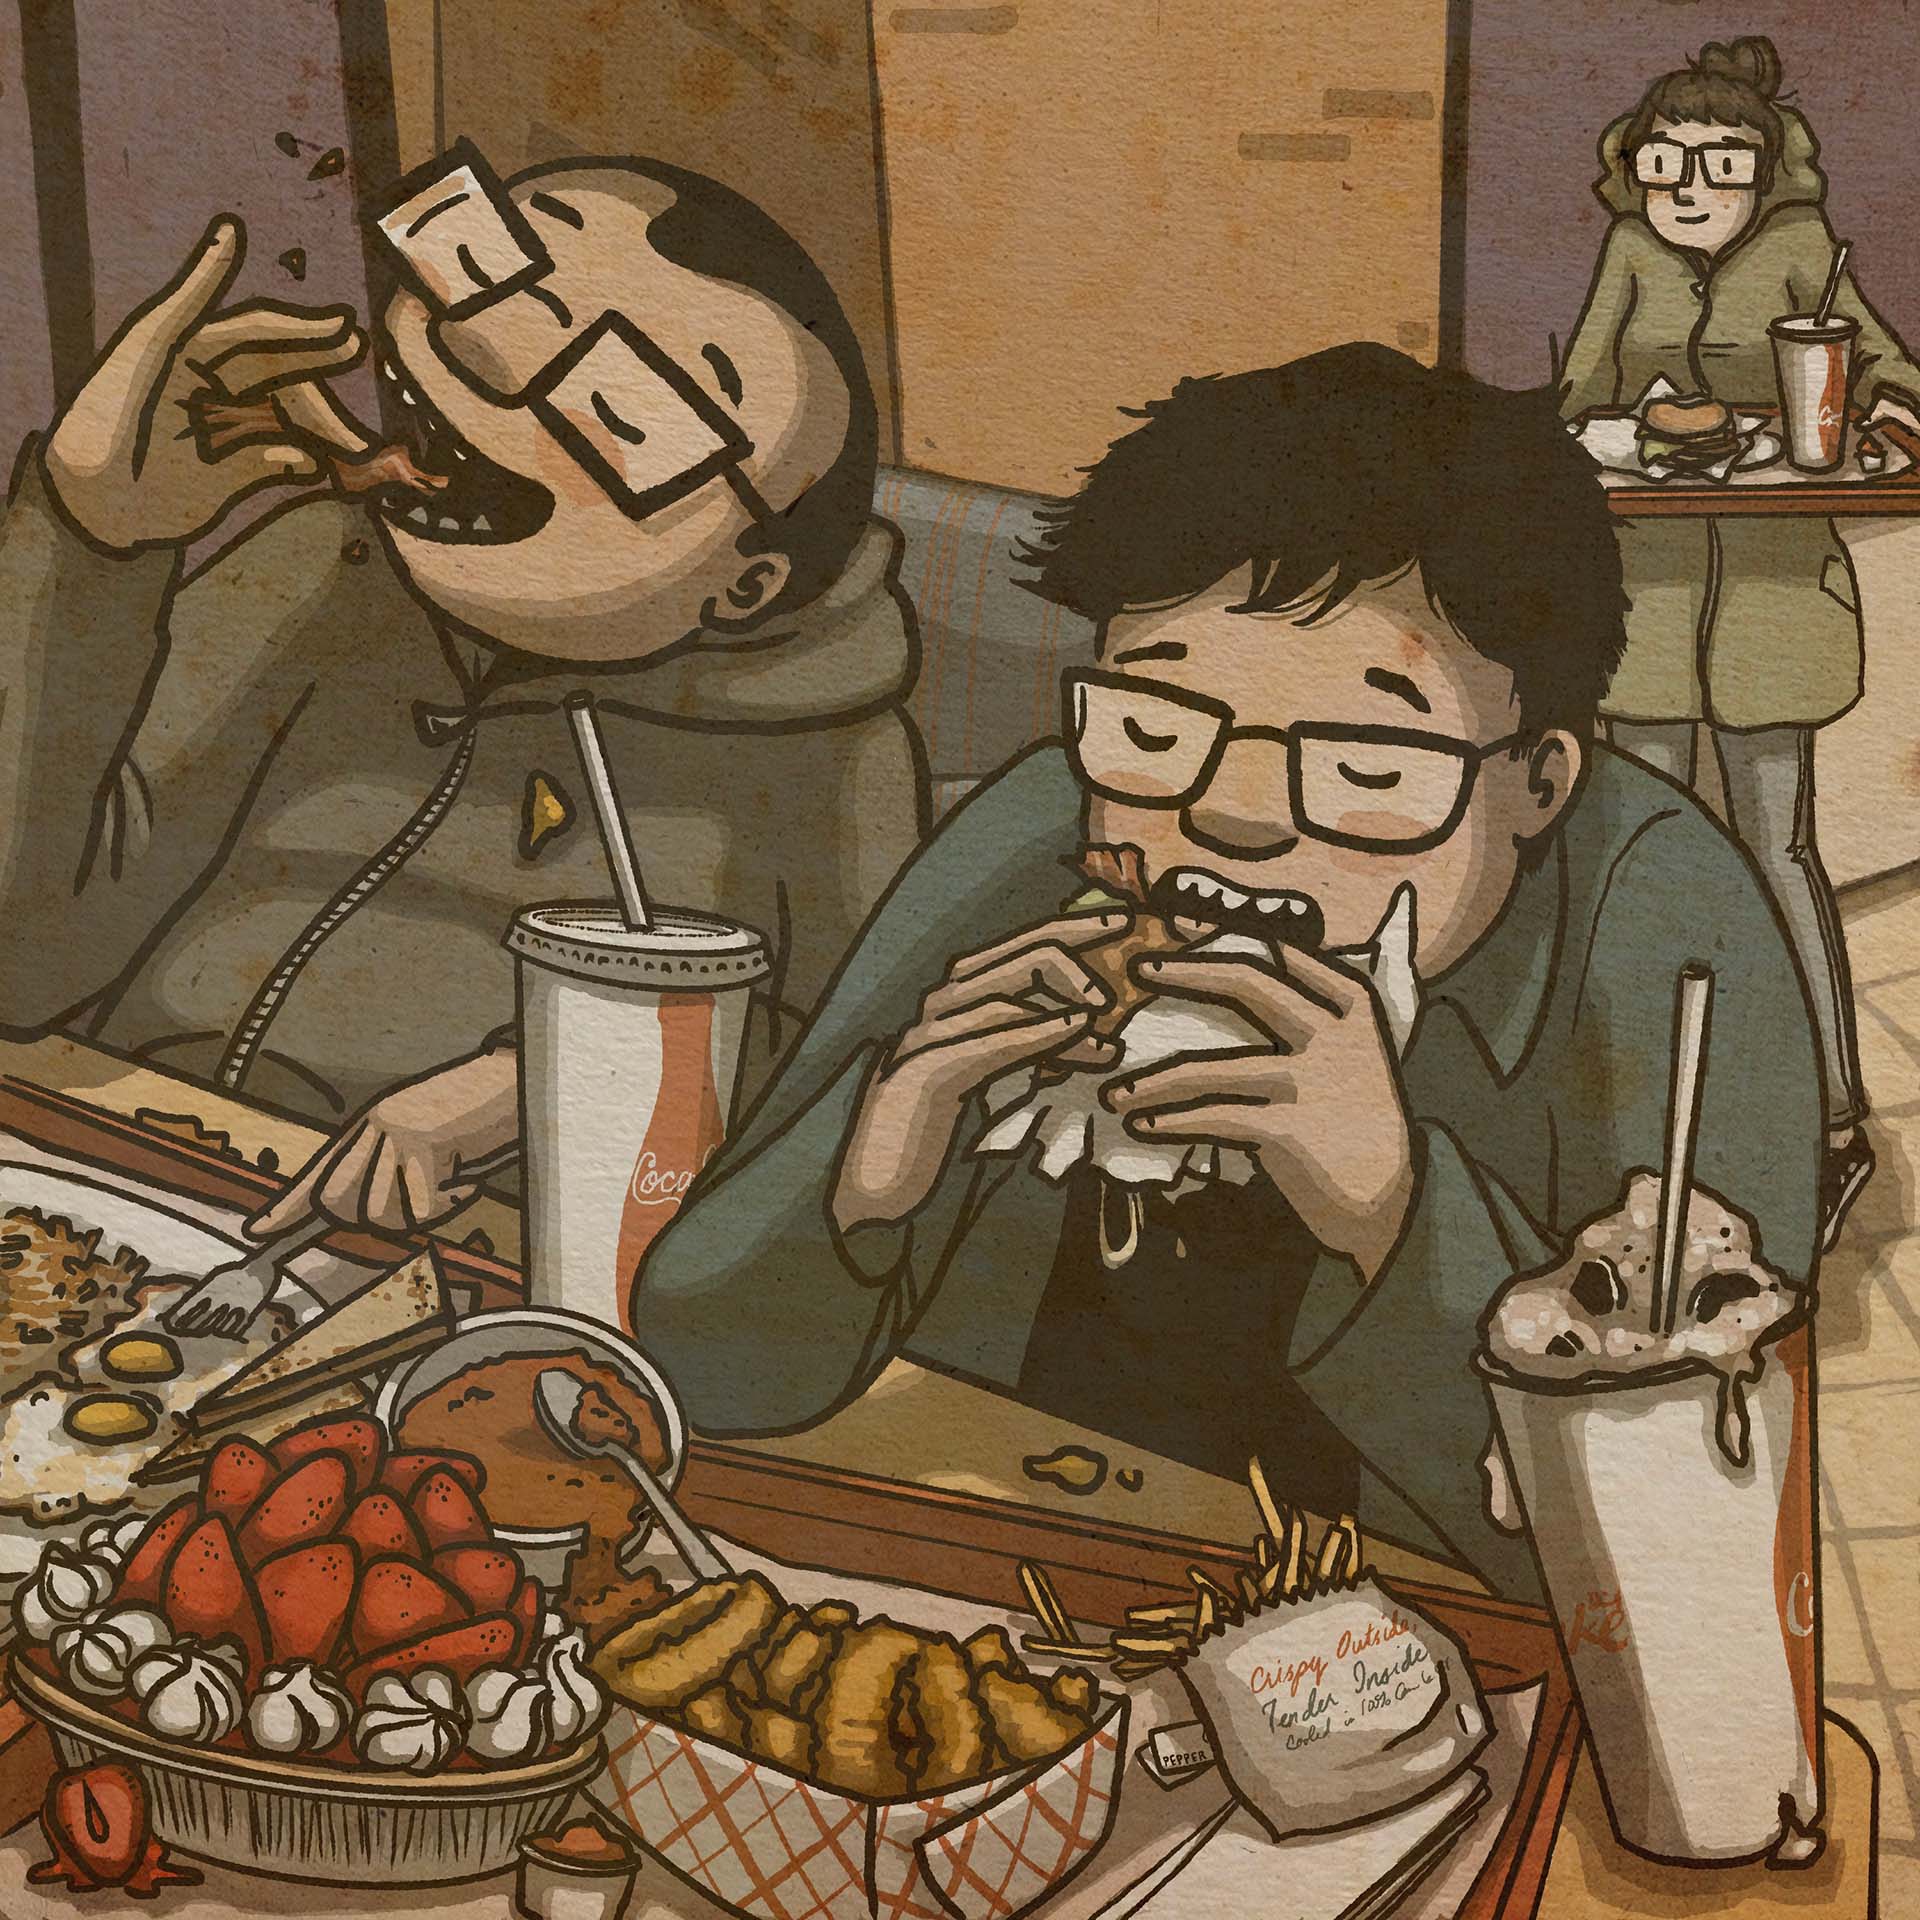 Illustration: Two men eating a spread of diner food (burger, onion rings, bacon, strawberry pie) while a woman approaches the table carrying more food on a tray.